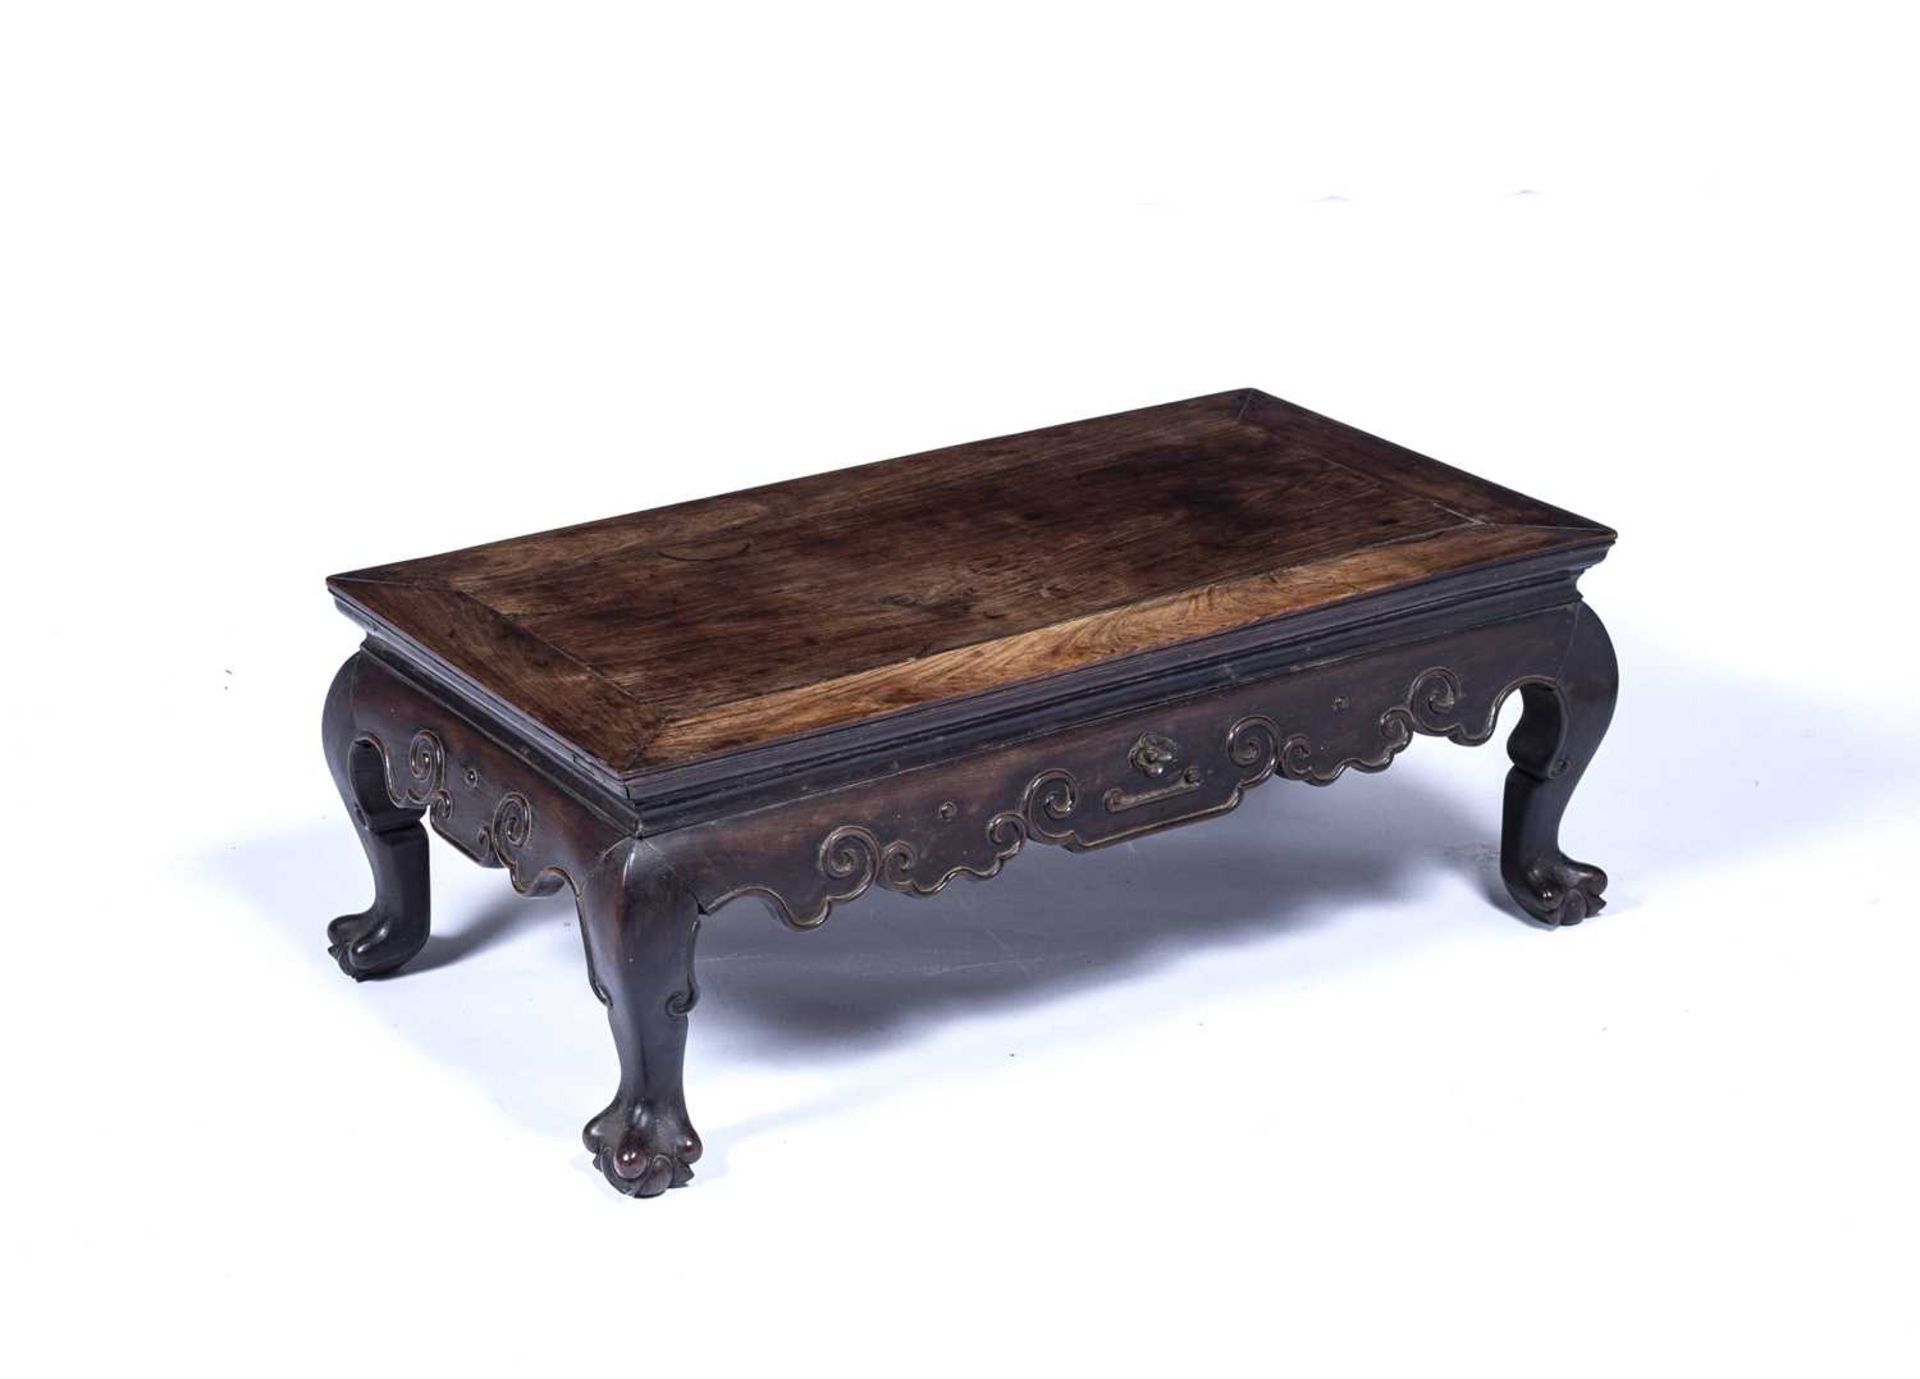 Hardwood carved 'Kang' table Chinese, with a carved under tier with cloud-shaped motifs, 76cm across - Image 2 of 5